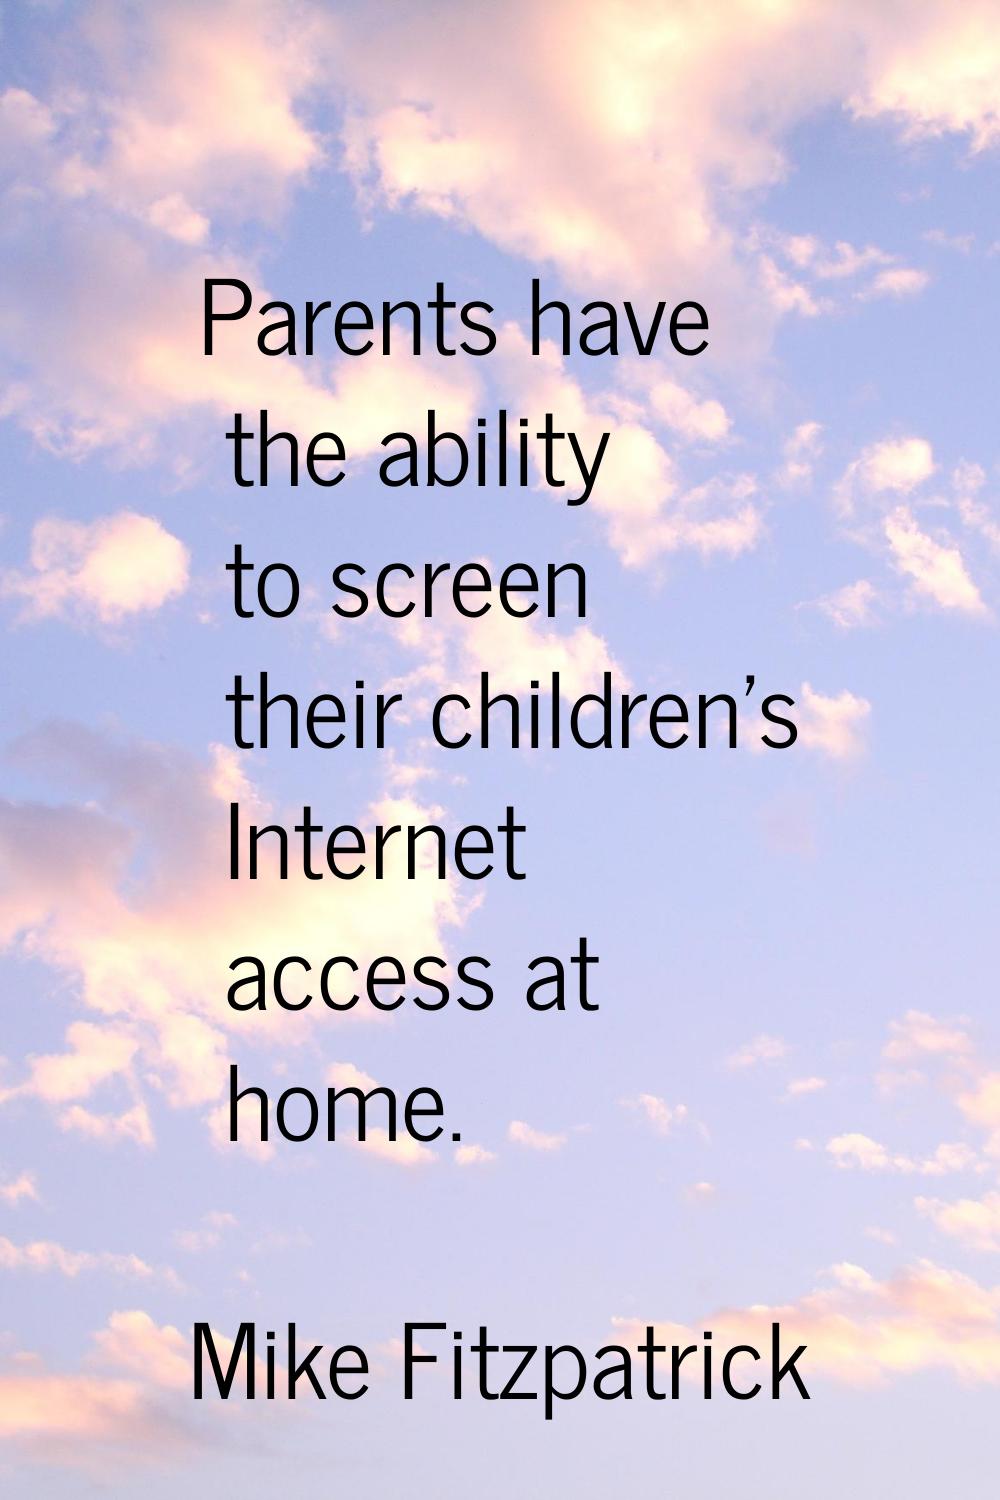 Parents have the ability to screen their children's Internet access at home.